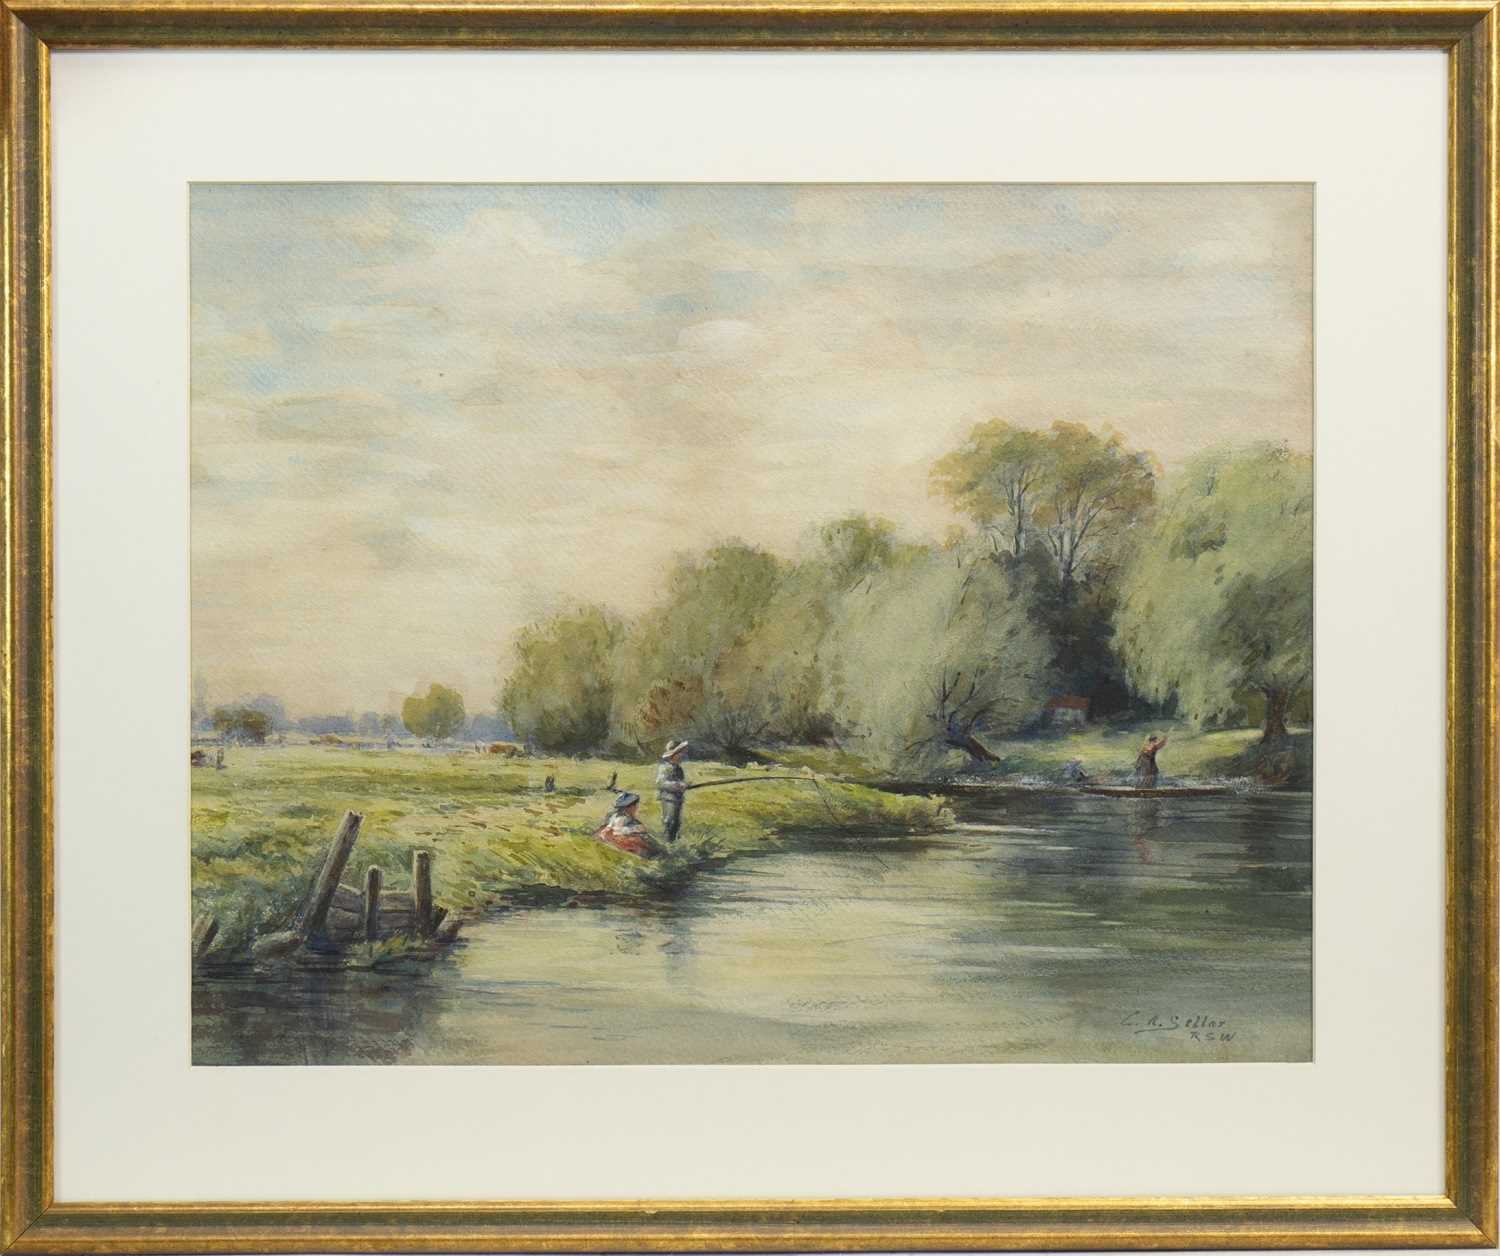 Lot 601 - FISHING BY THE STREAM, A WATERCOLOUR BY C R SELLAR